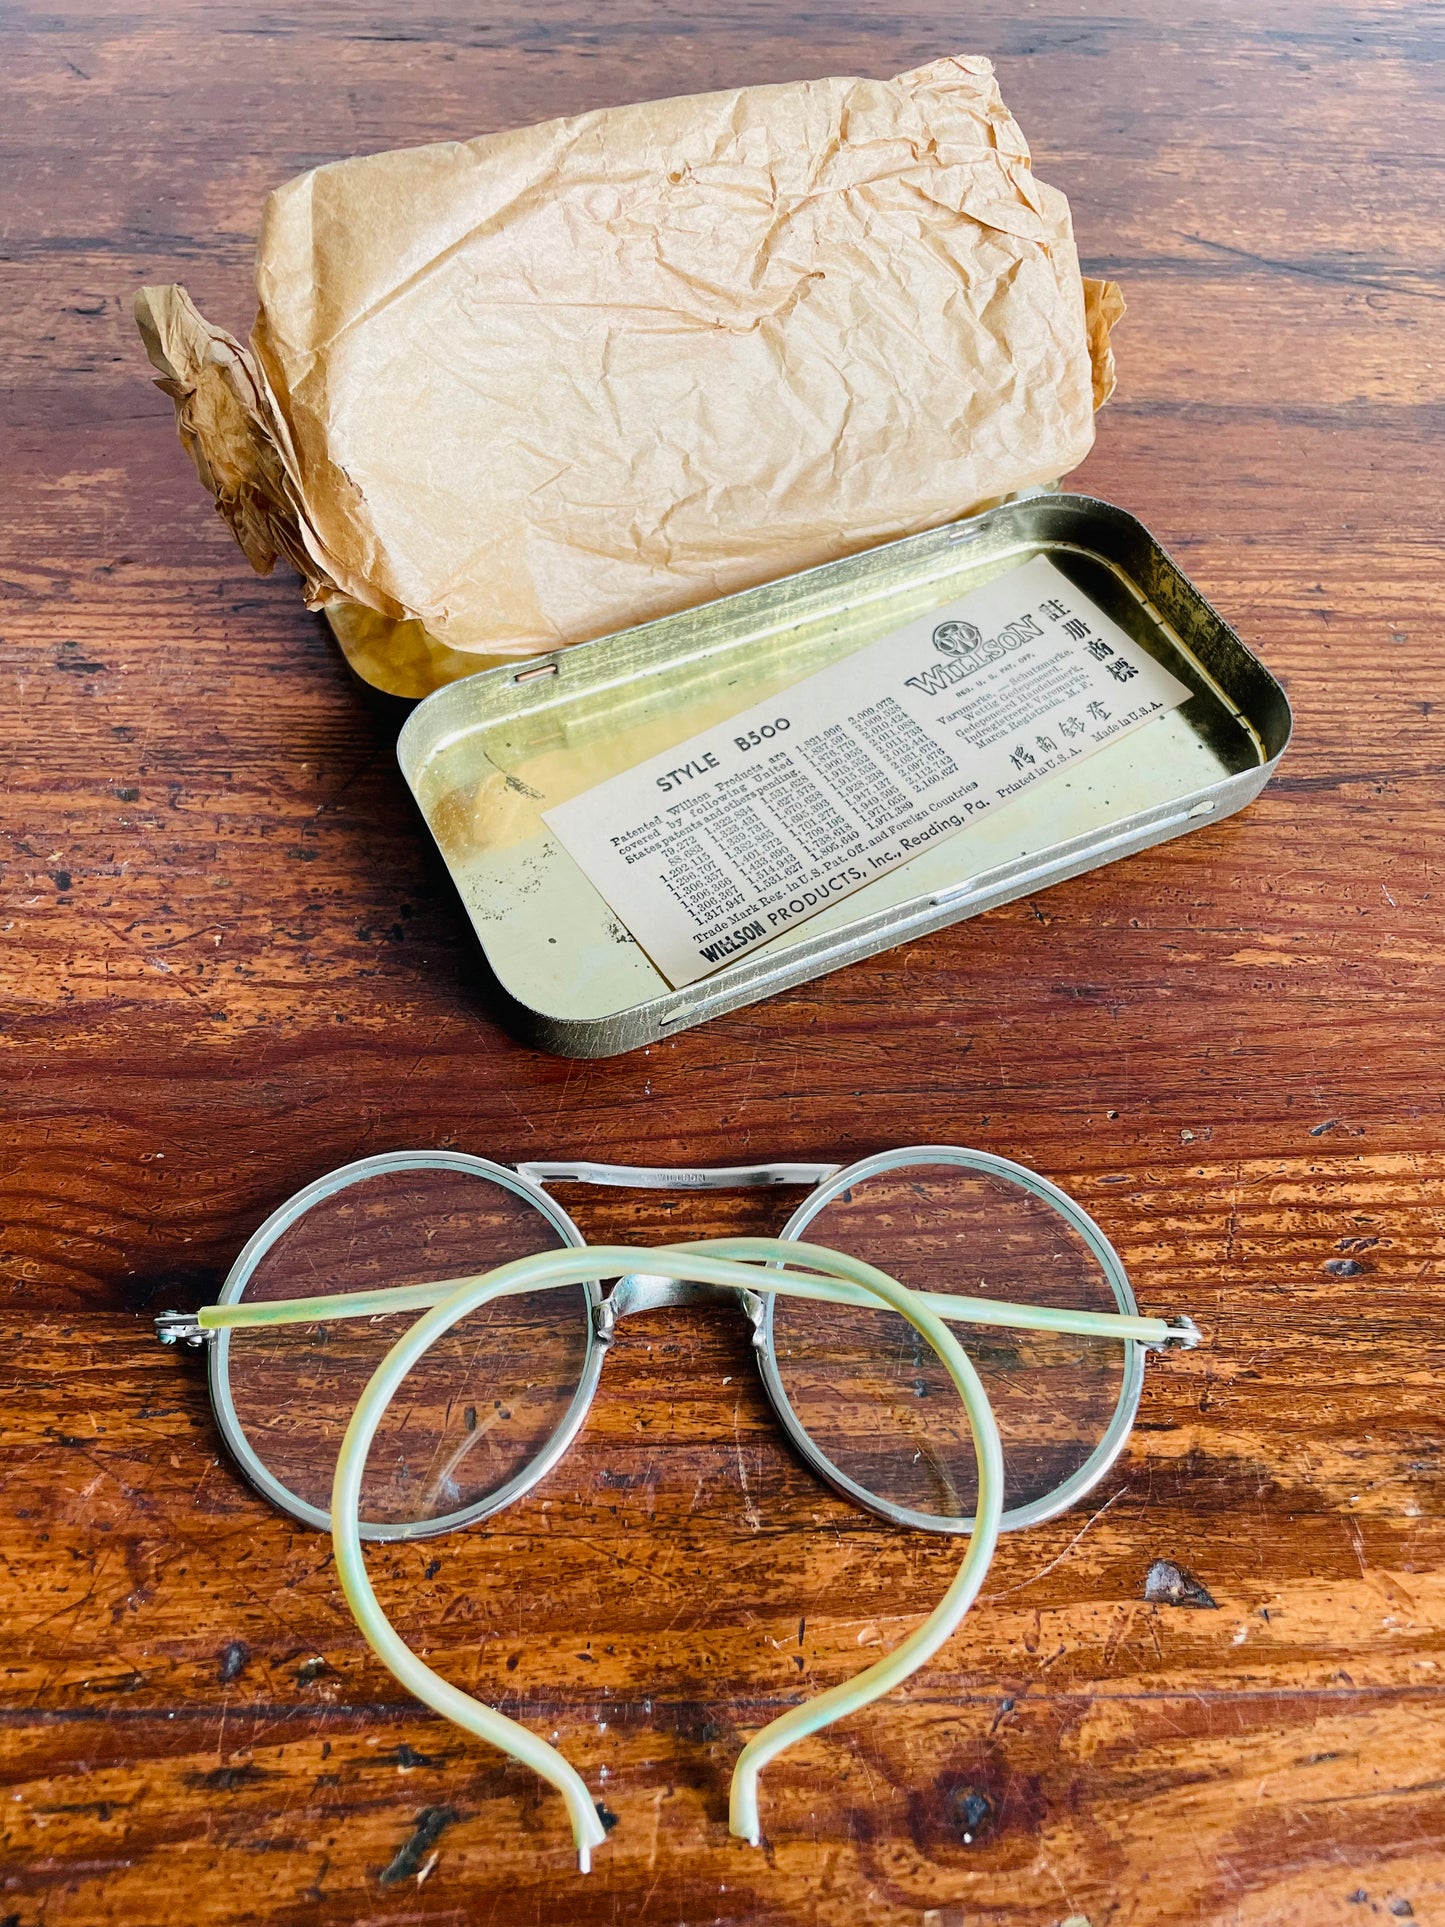 Willson Wire Rimmed Style B500 Safety Googles in Tin Case - Steampunk Biker Aviation Style - Reading Pennsylvania USA